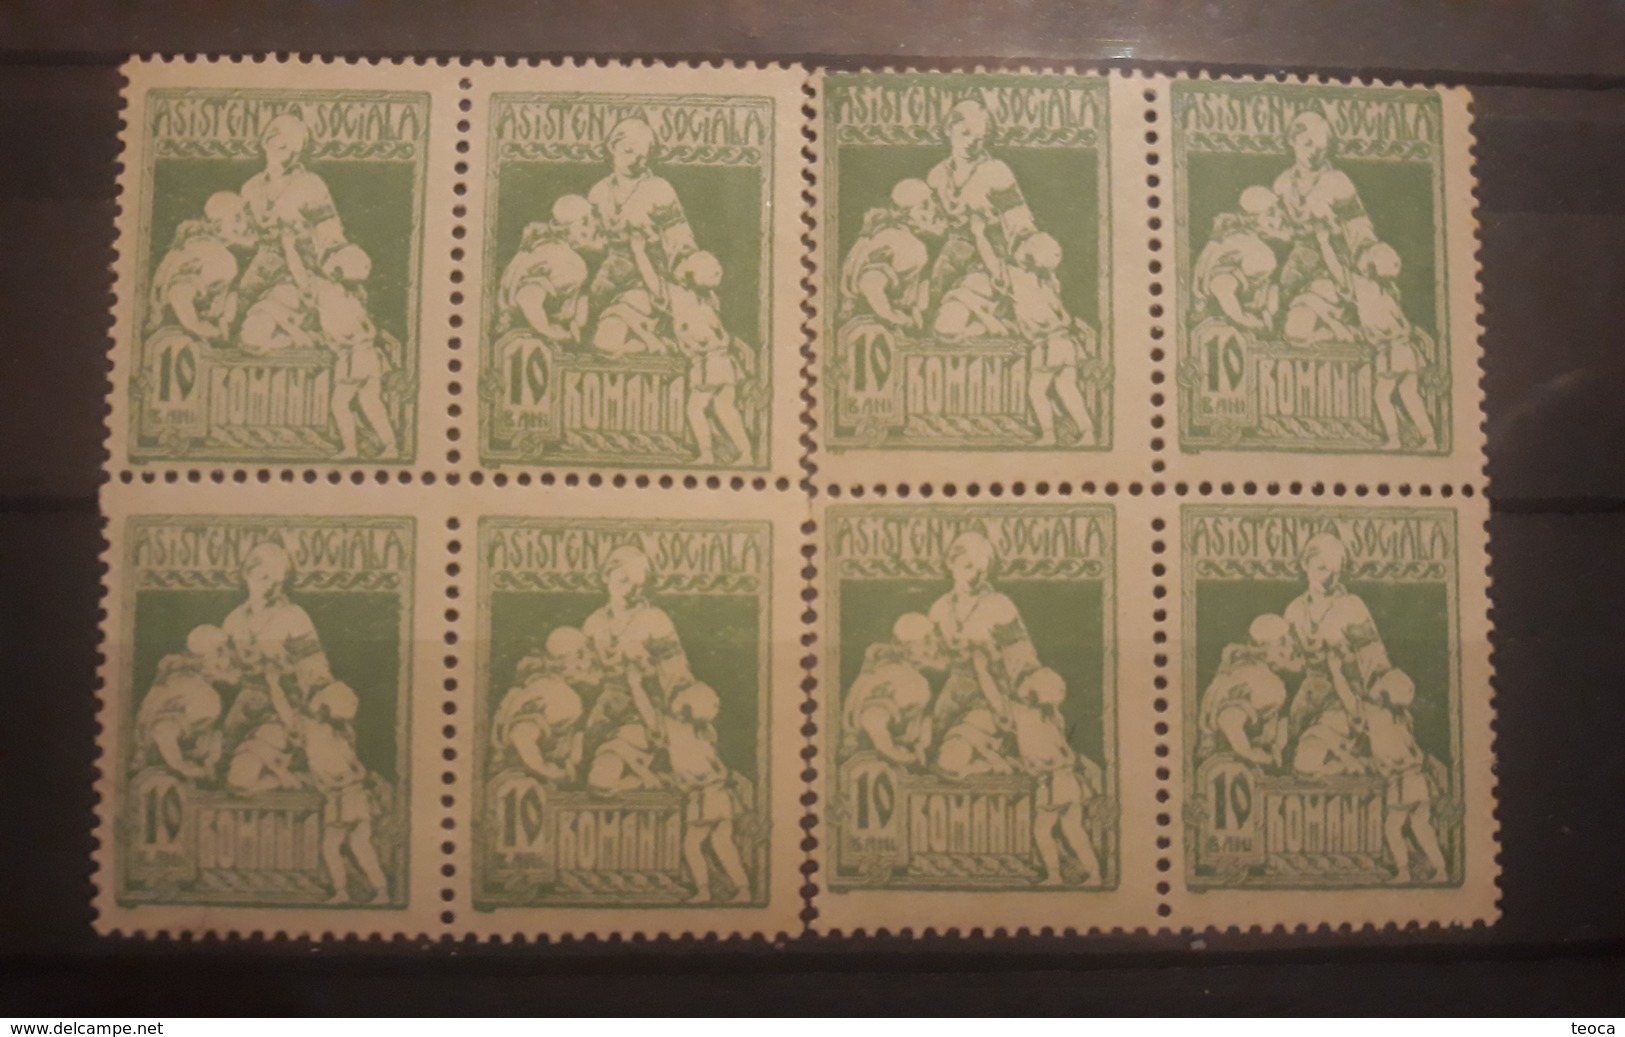 Romania 1921  Social Assistance, Revenue Stamps , BF X4, MNH,ERROR MISPLACED IMAGE PERFORATION - Ungebraucht